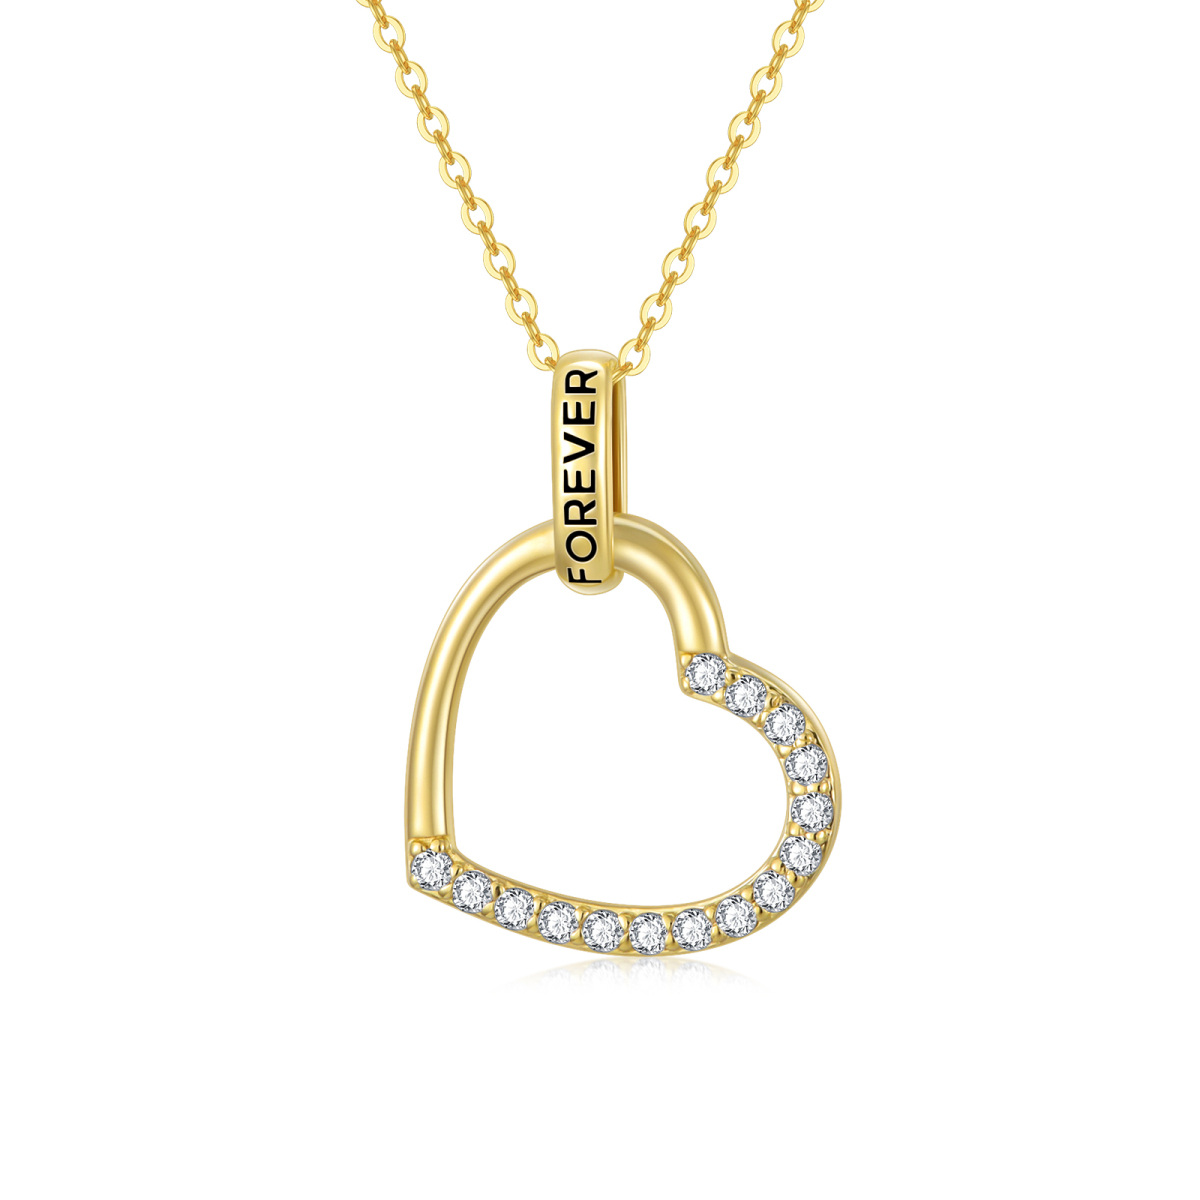 14K Gold Cubic Zirconia Heart Pendant Necklace with Engraved Word-1